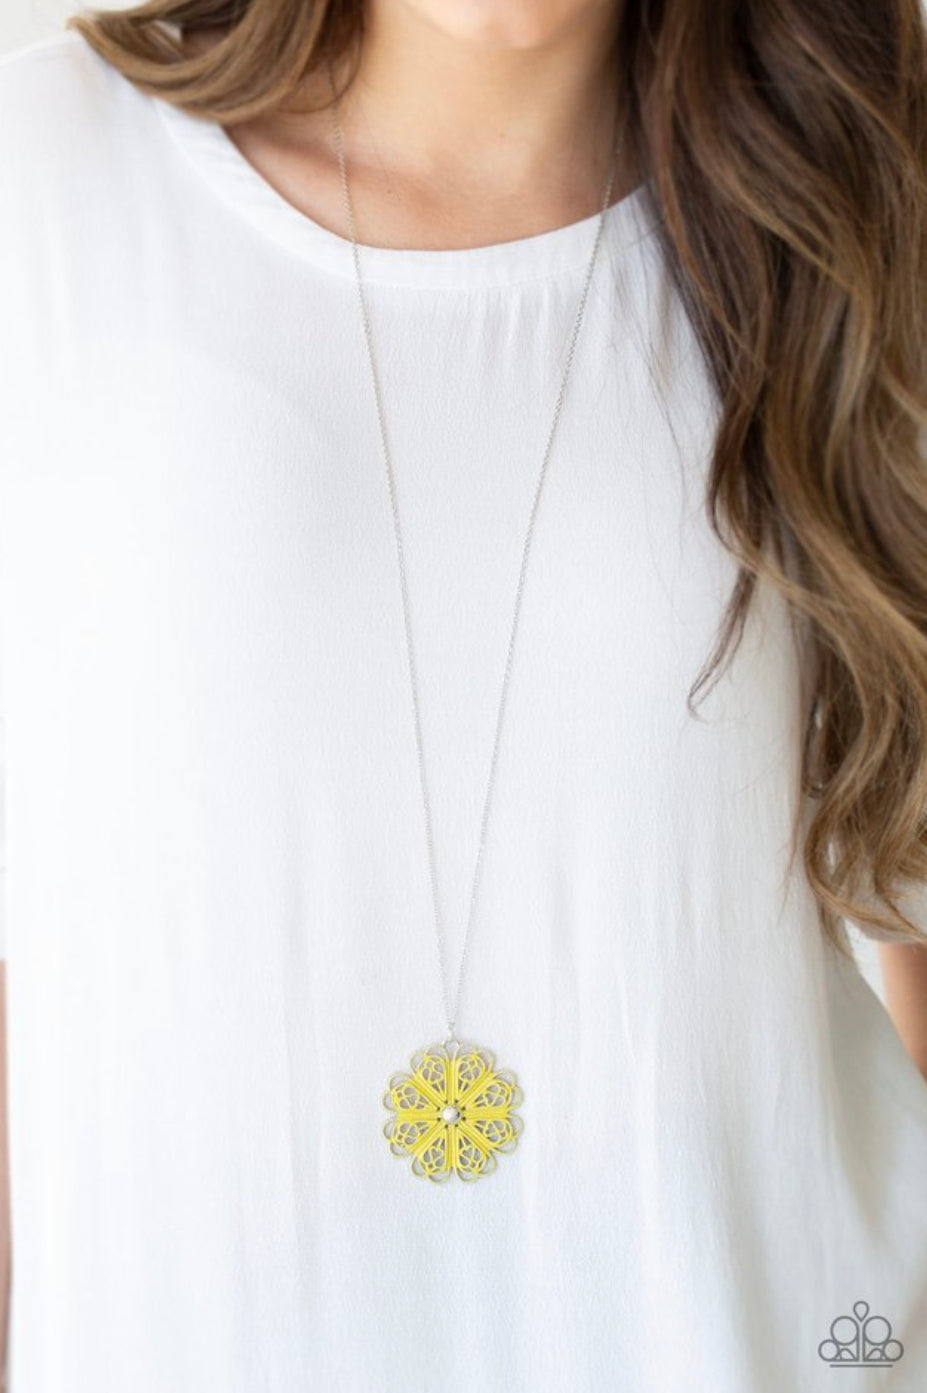 Paparazzi Spin Your PINWHEELS - Yellow Necklace